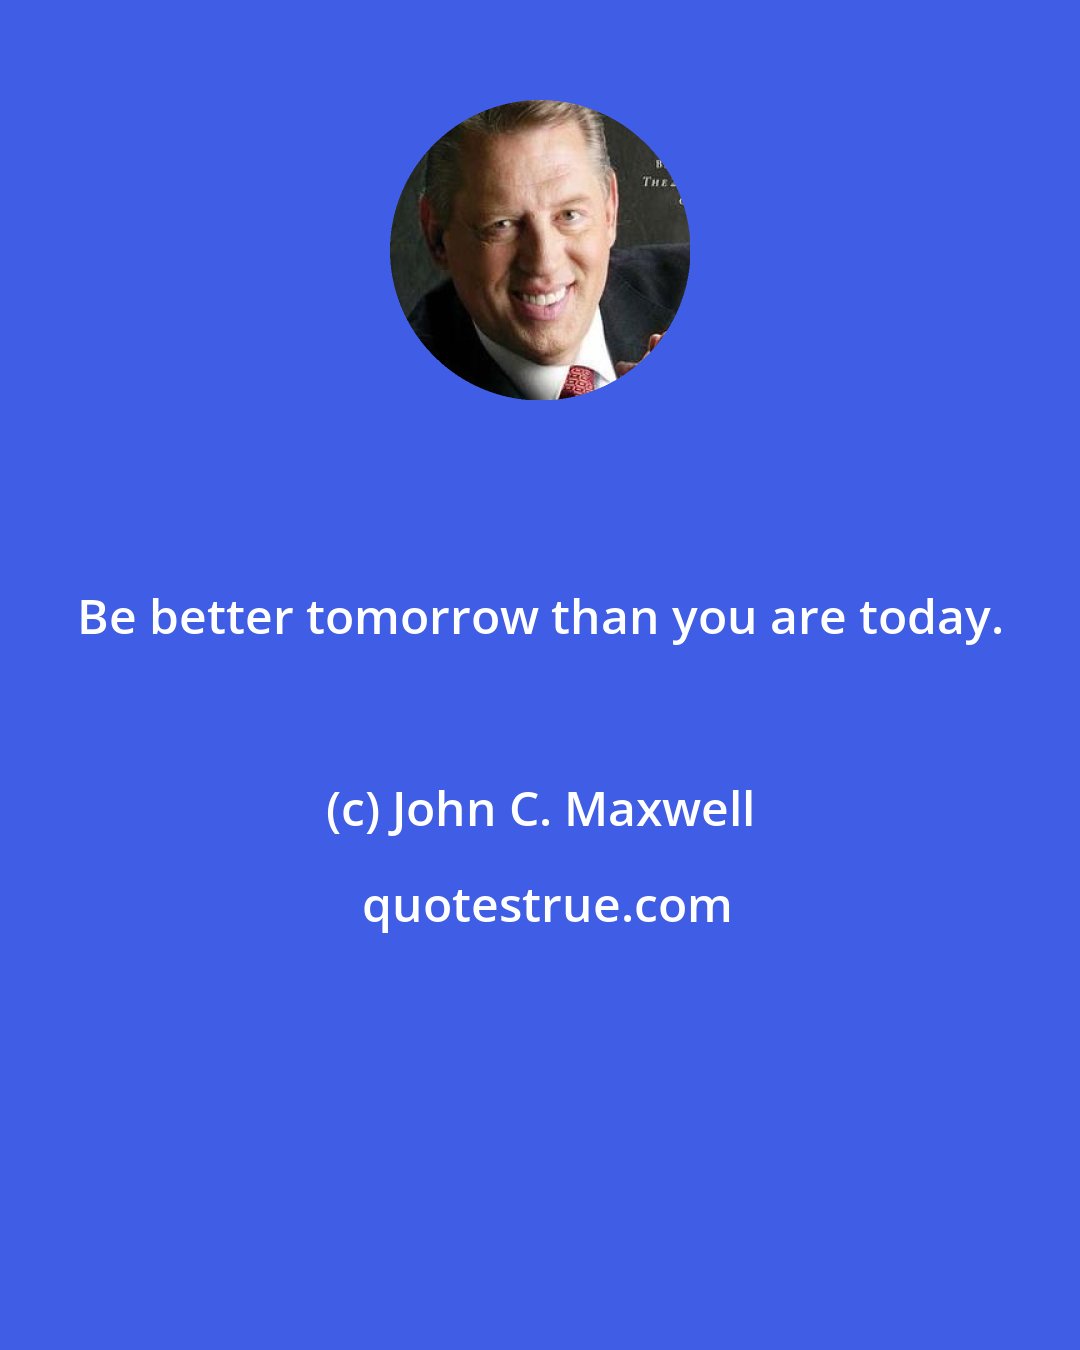 John C. Maxwell: Be better tomorrow than you are today.